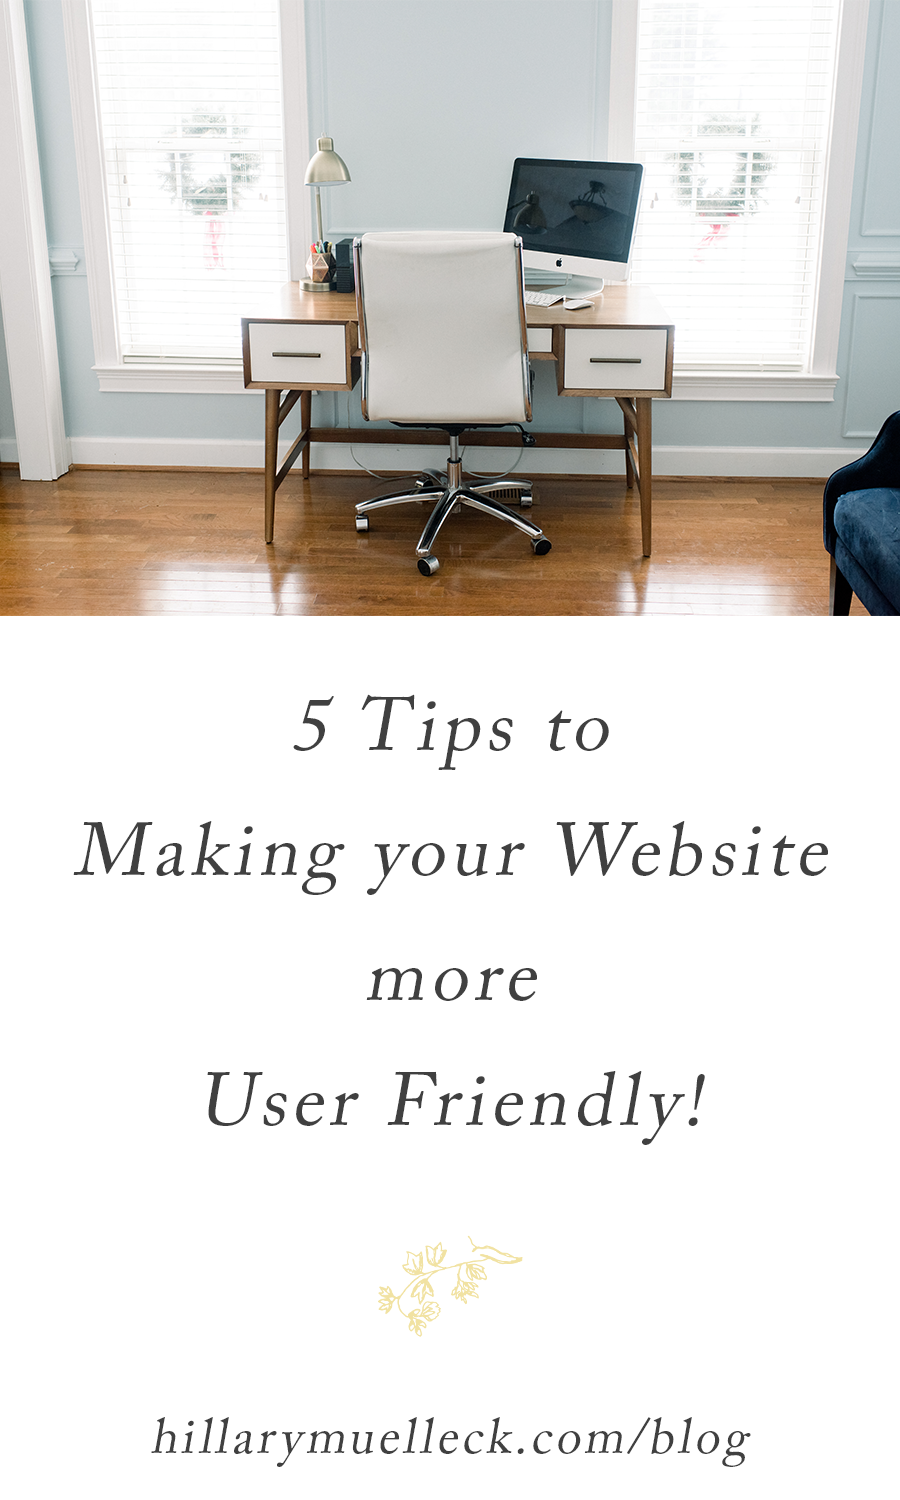 5 Tips to Making your Website more User Friendly